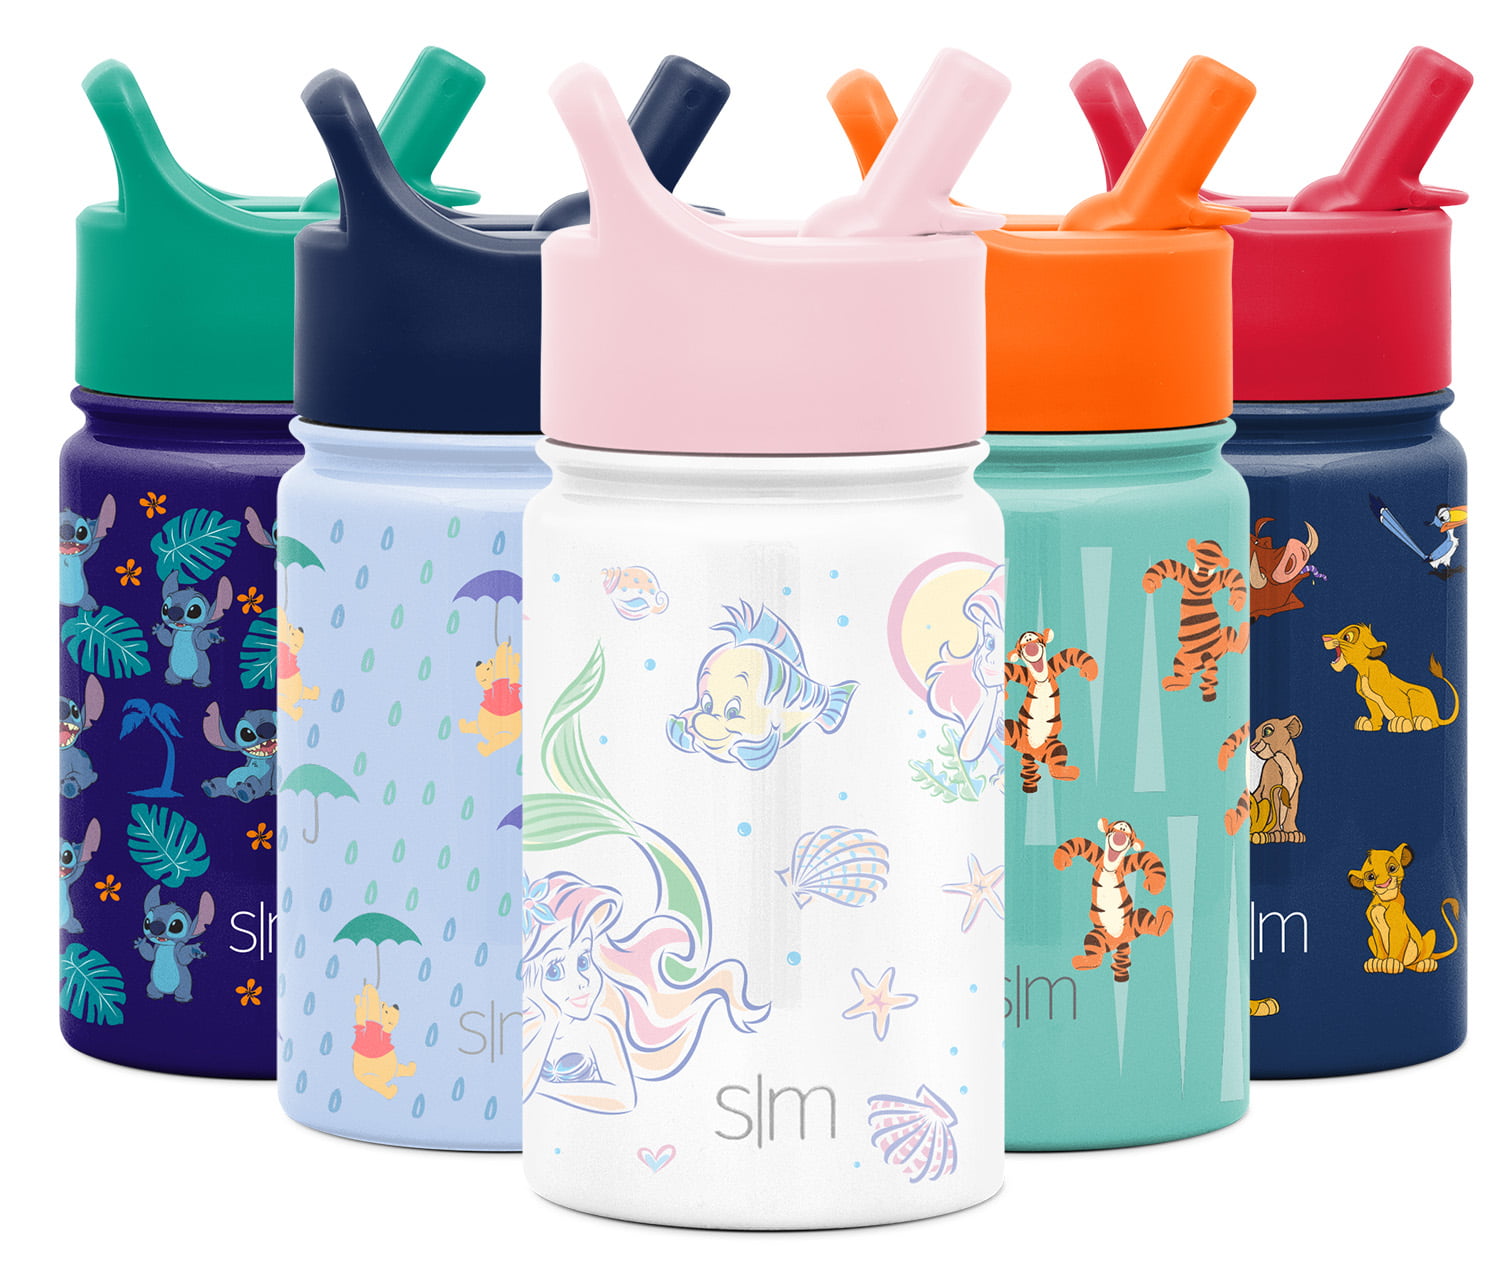  Simple Modern Disney Wish Kids Water Bottle with Straw Lid, Reusable Insulated Stainless Steel Cup for Girls, School, Summit  Collection